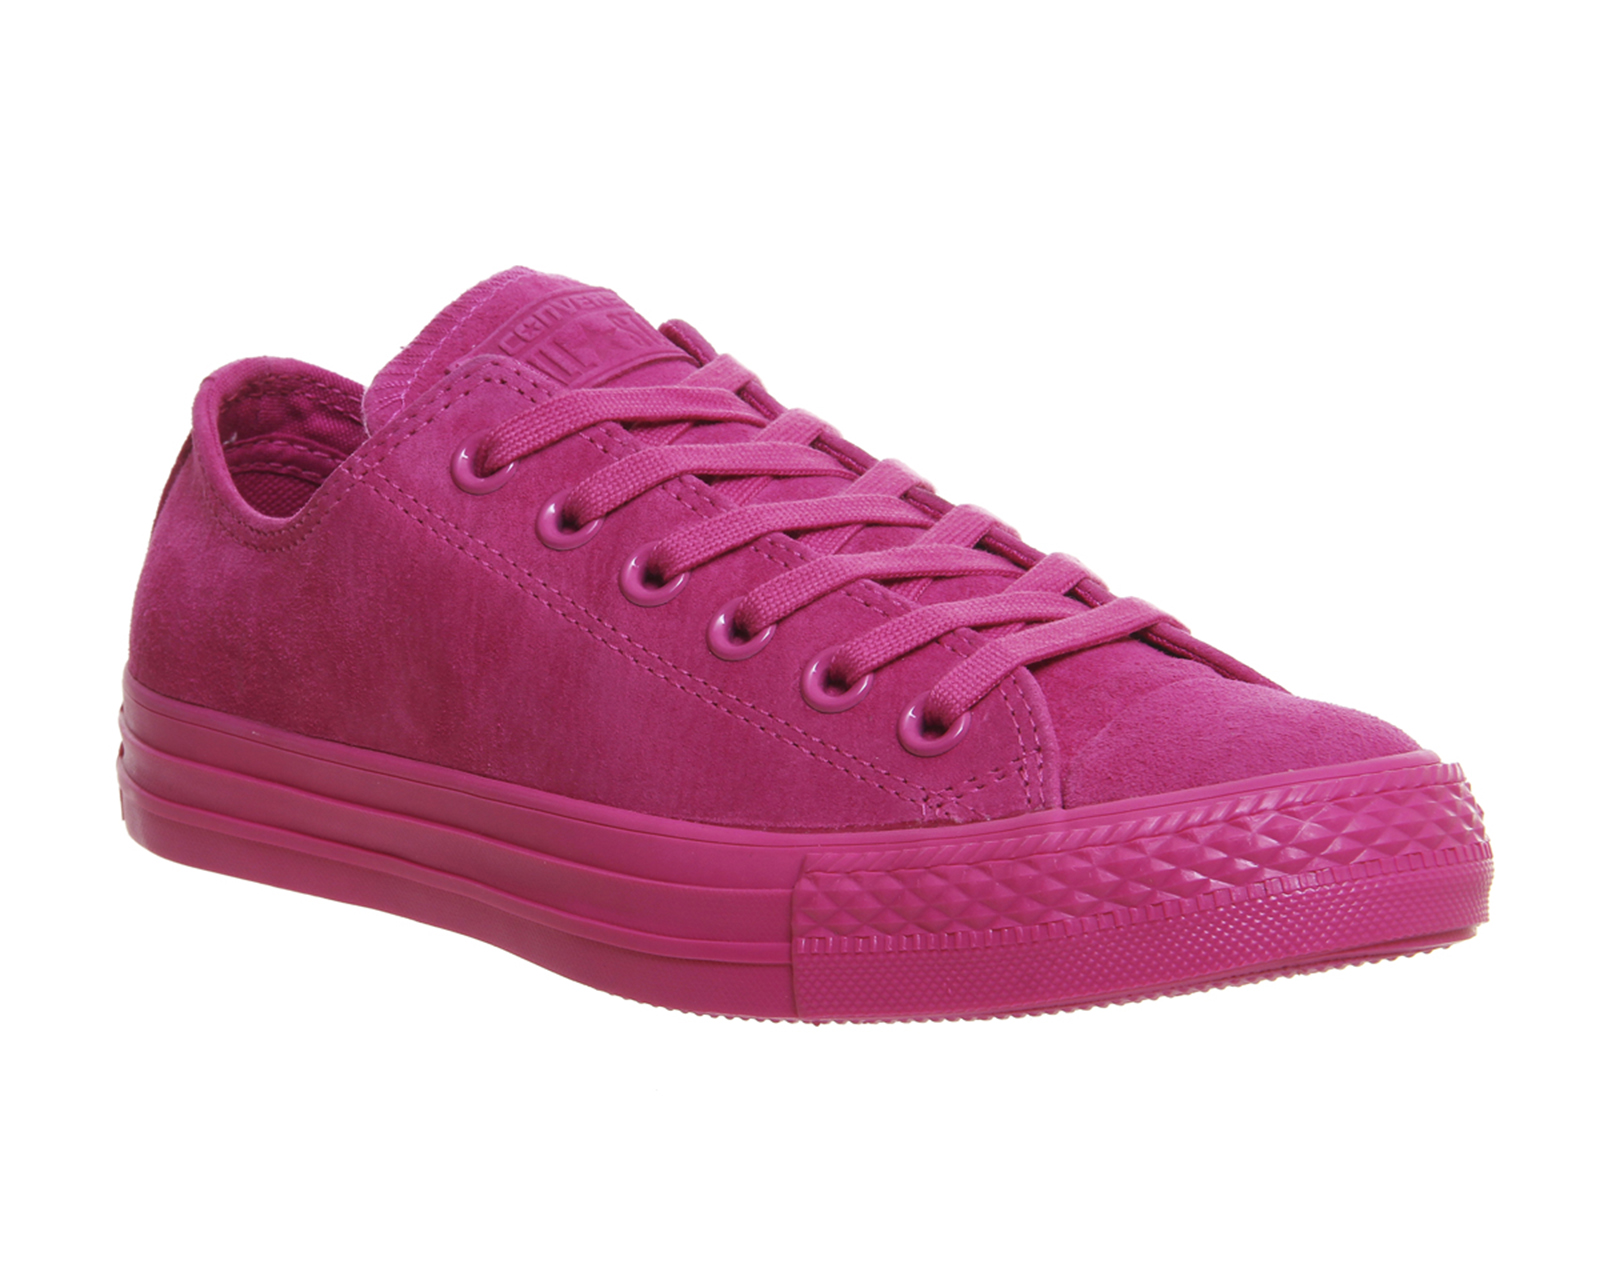 converse all star pink leather